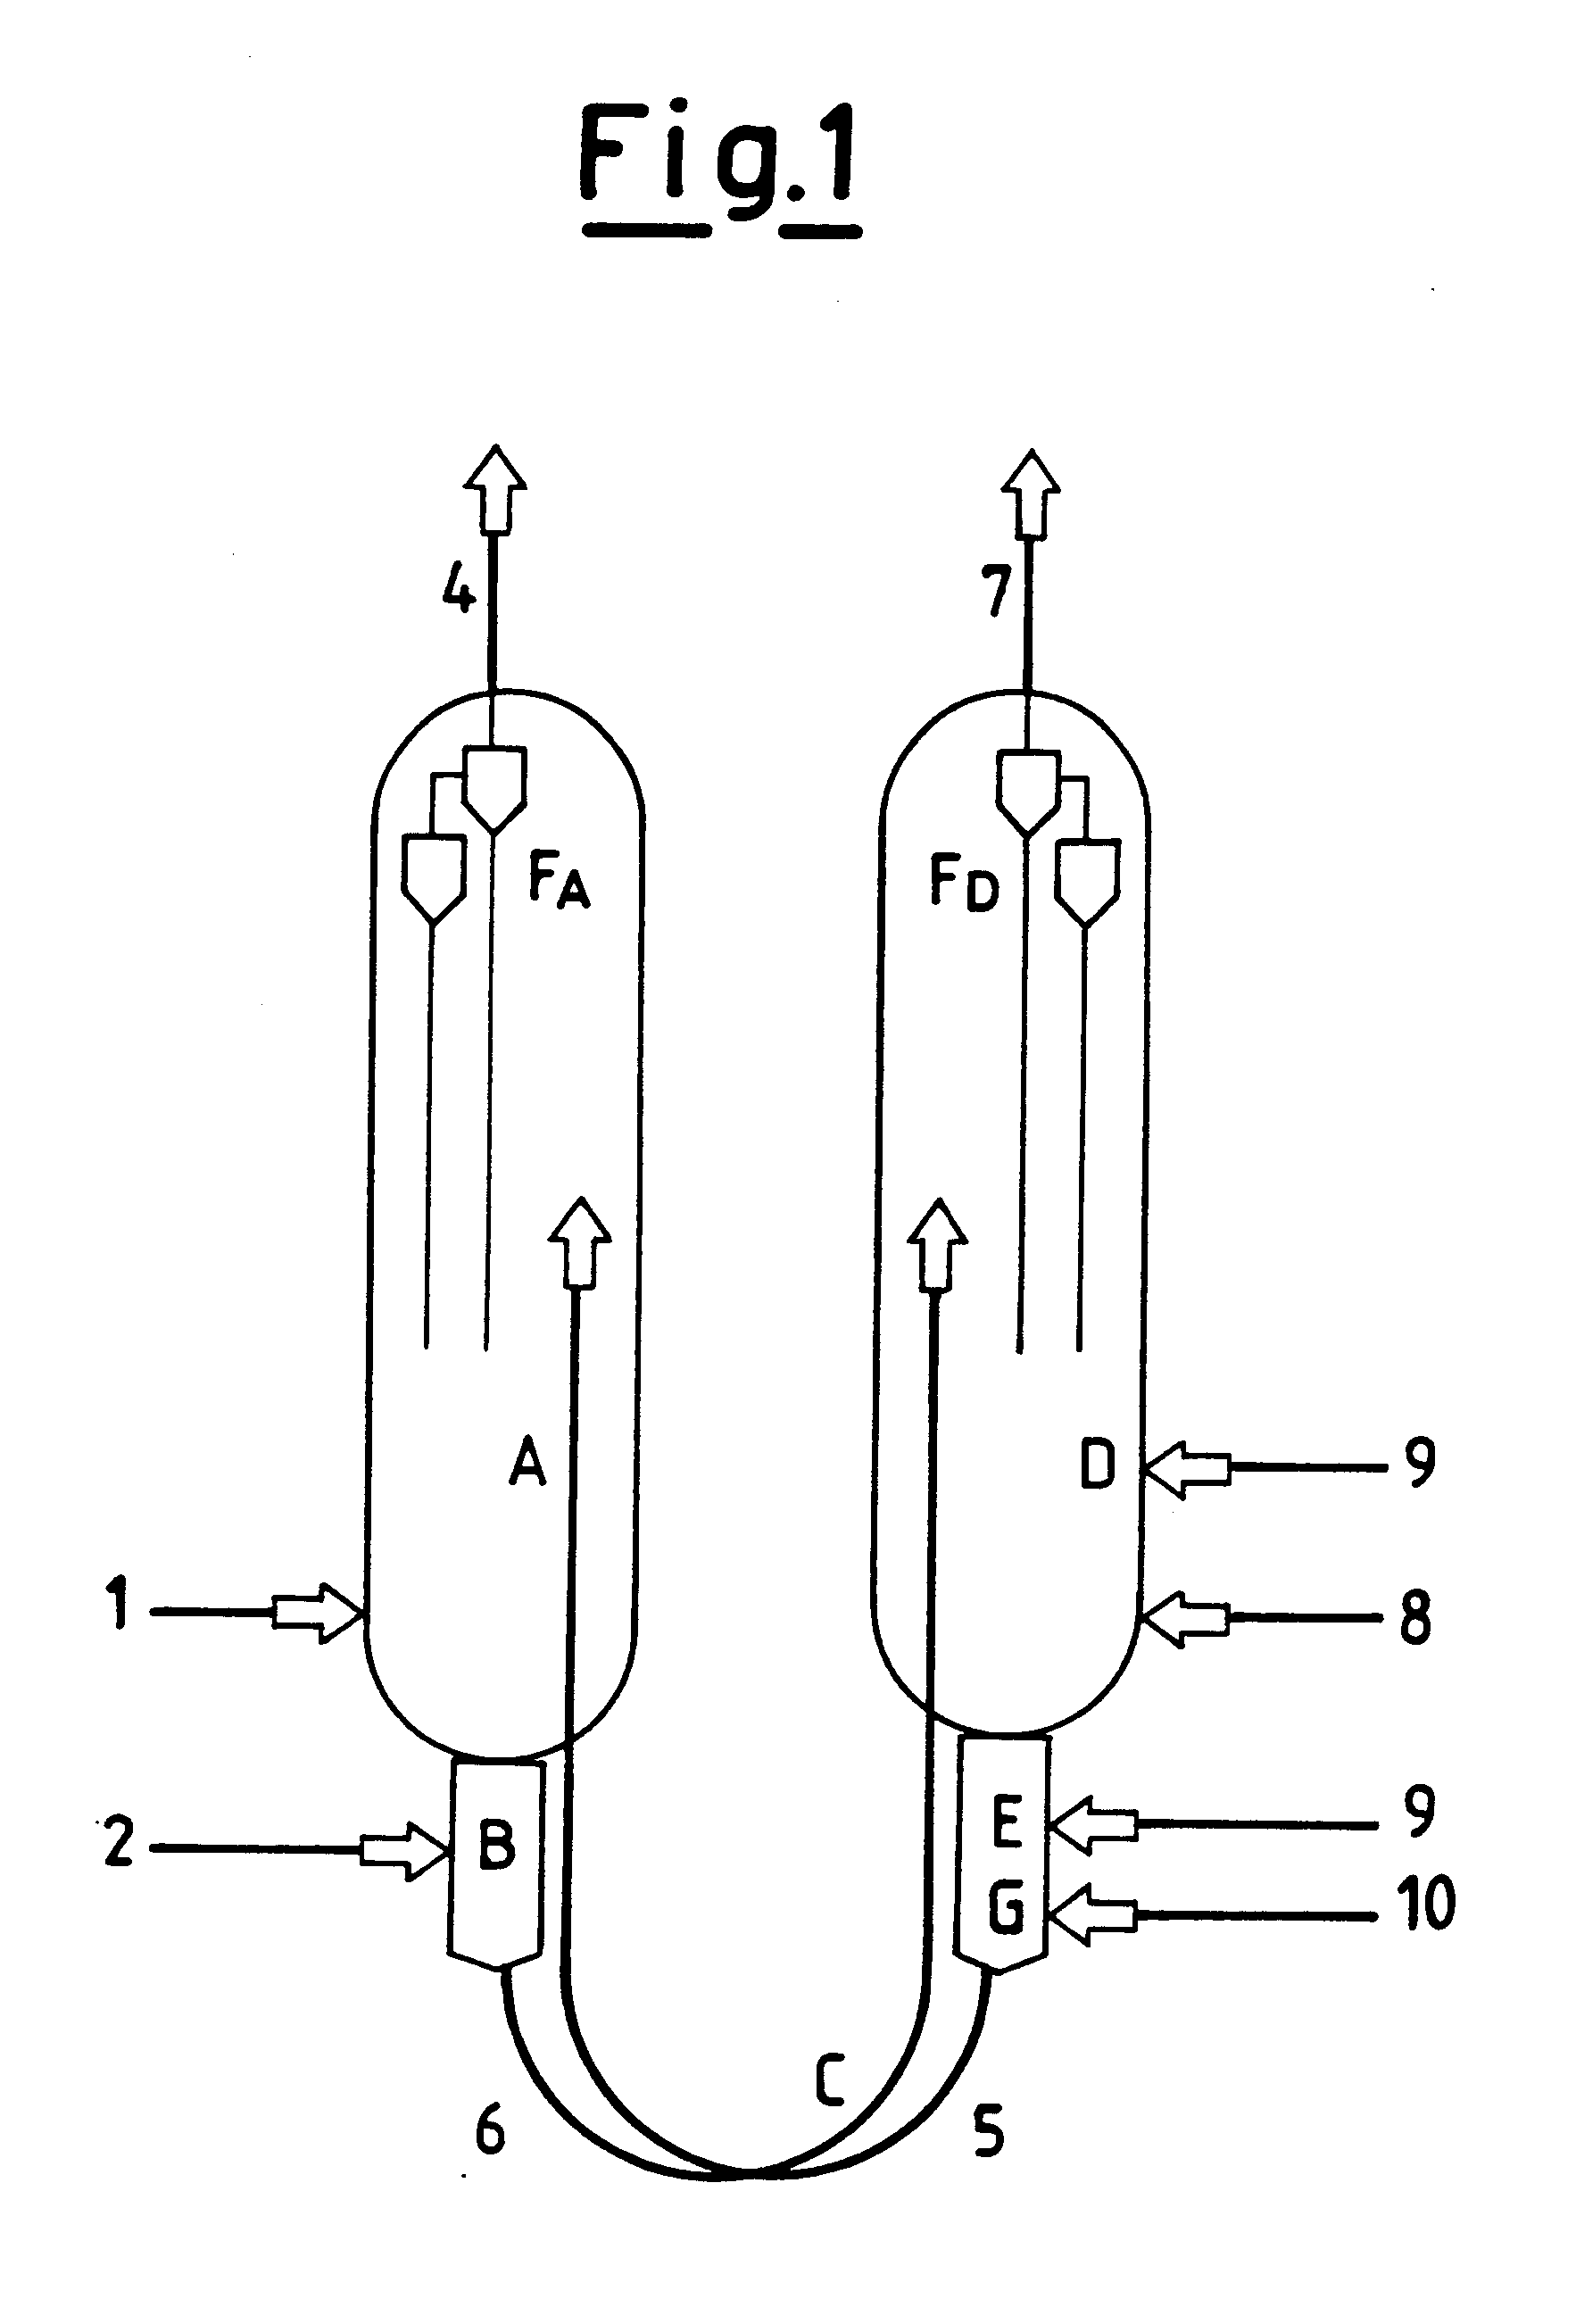 Process for obtaining light olefins by the dehydrogenation of the corresponding paraffins